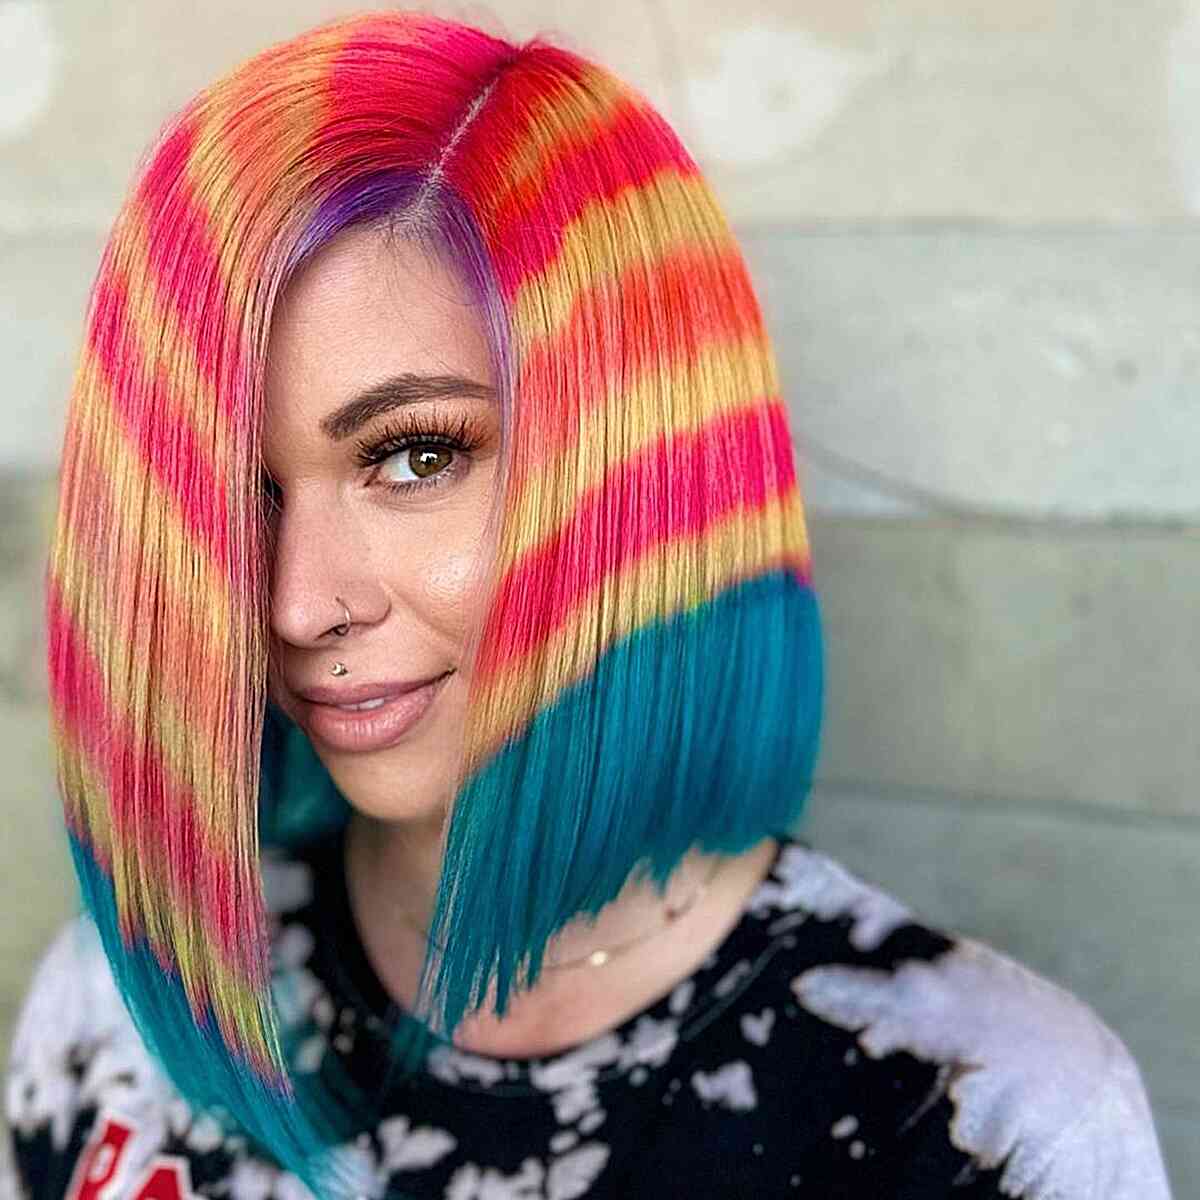 Perfectly Placed Colors Hair Ideas for women who are edgy with a style and purpose